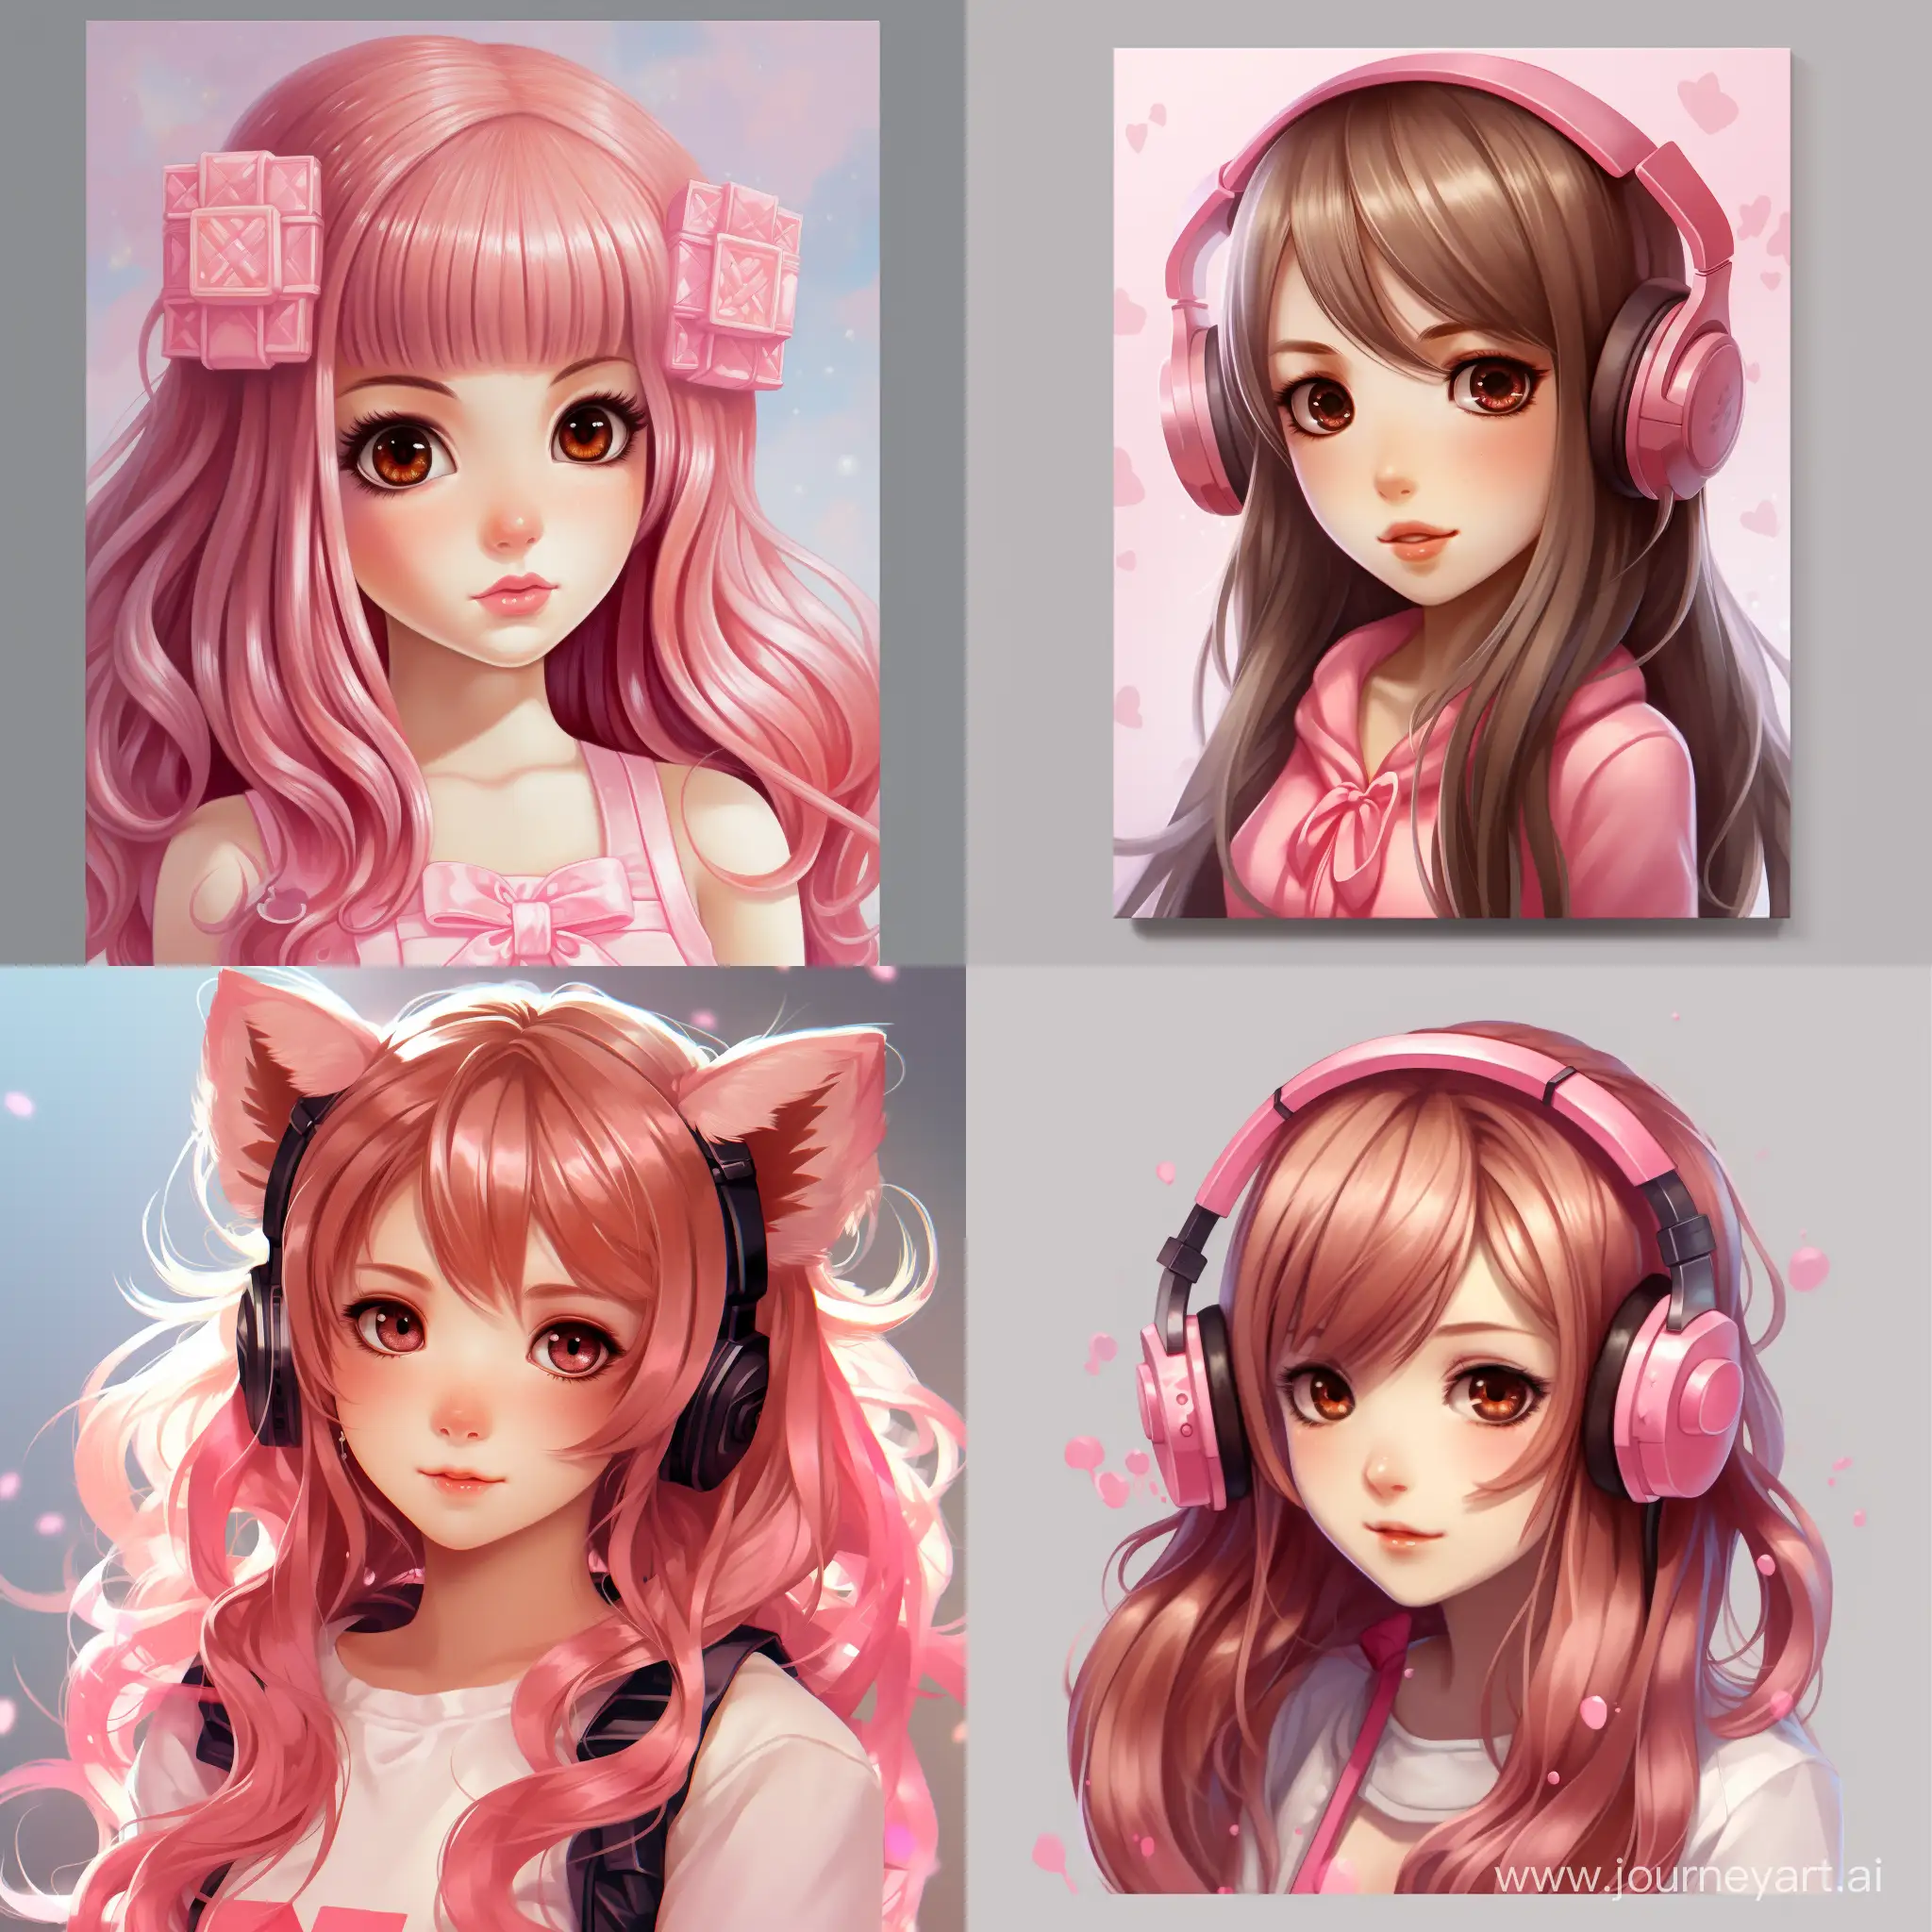 Adorable-Minecraft-Girl-in-Pink-Art